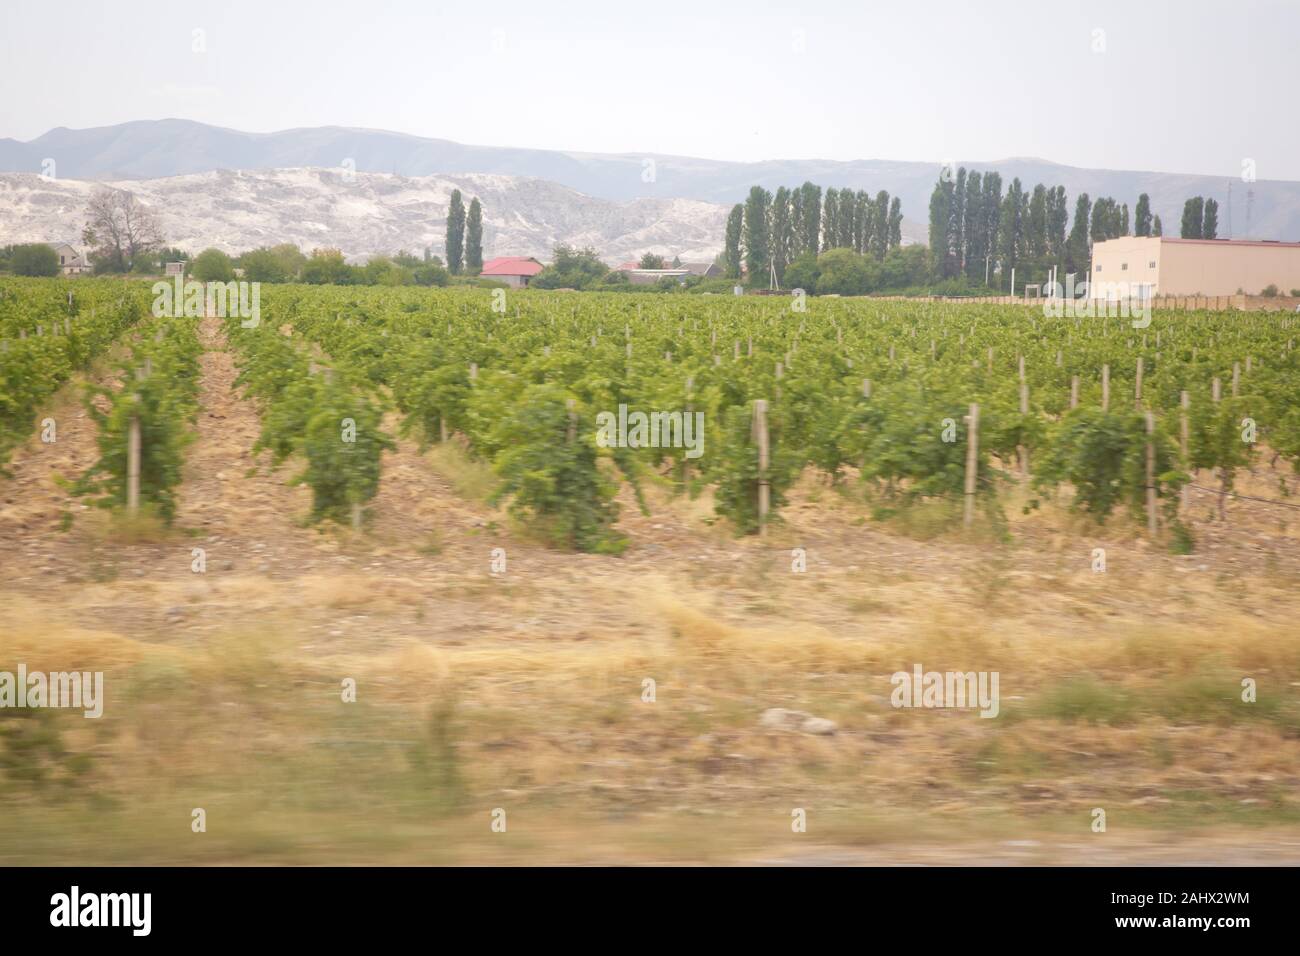 Behind the vineyard there are villages and mountains.The photo was taken in Azerbaijan when there was no sunshine. Grapes field . Beautiful landscape Stock Photo